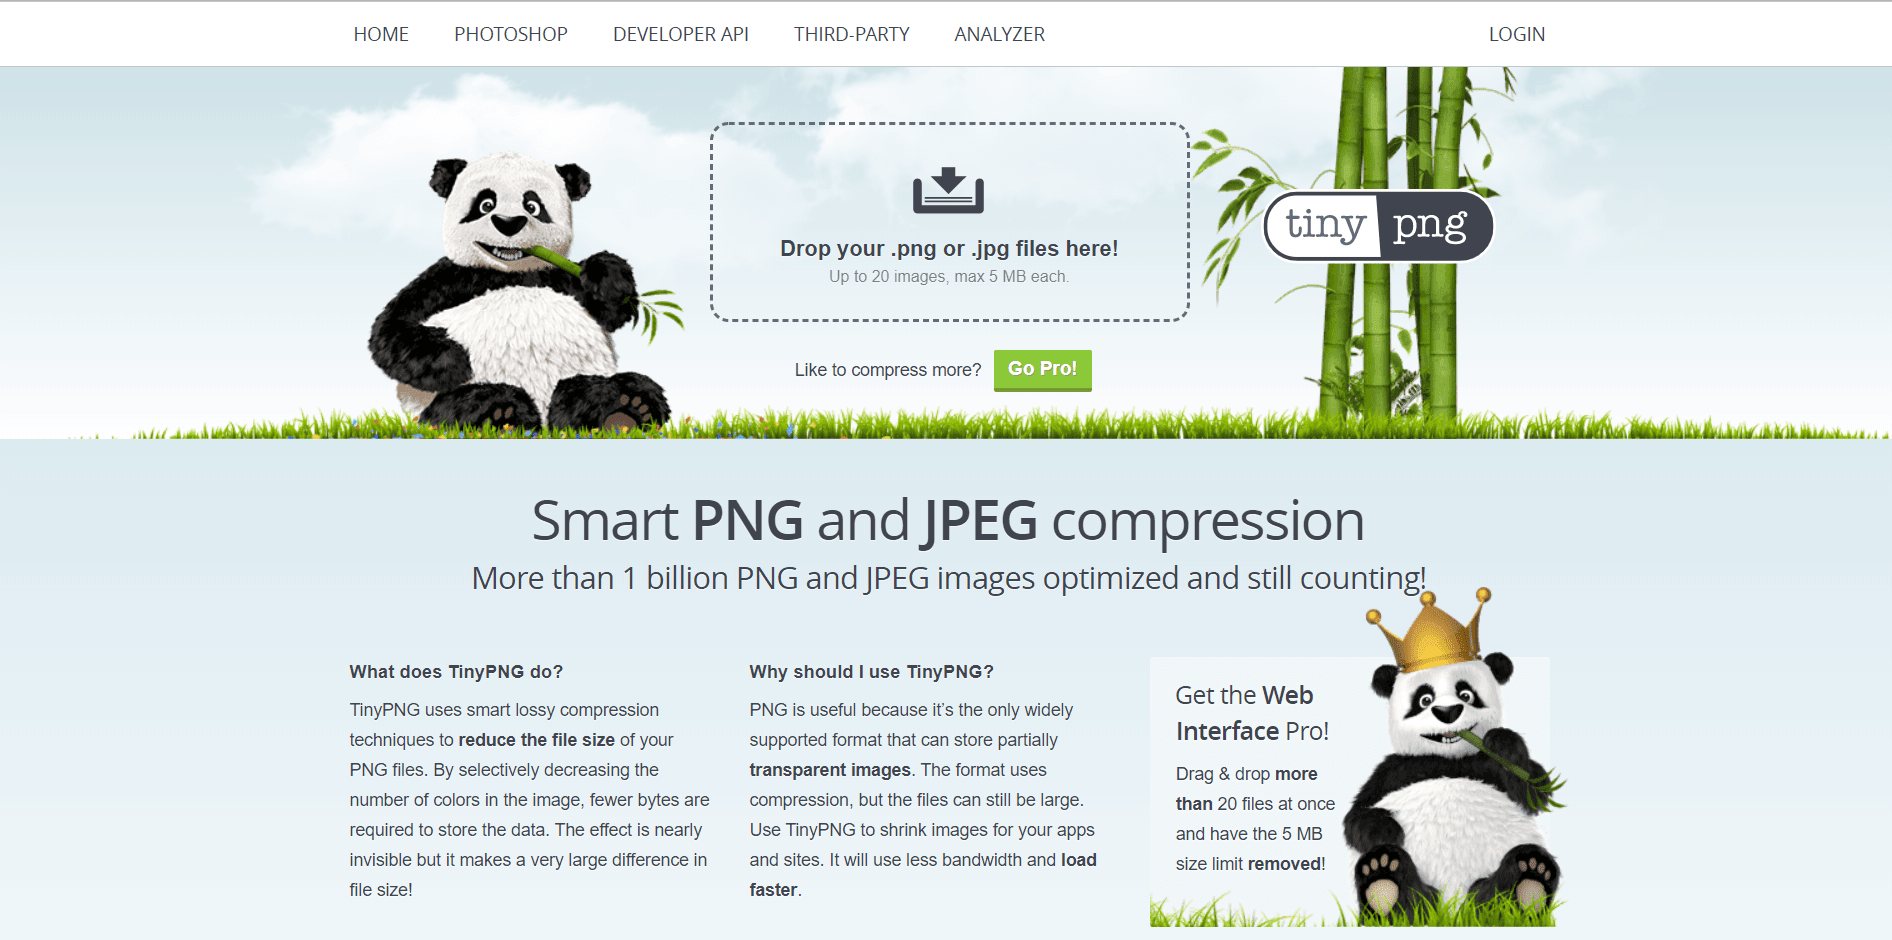 TinyPNG homepage. Image of a panda eating bamboo as well as other text written on the screen.